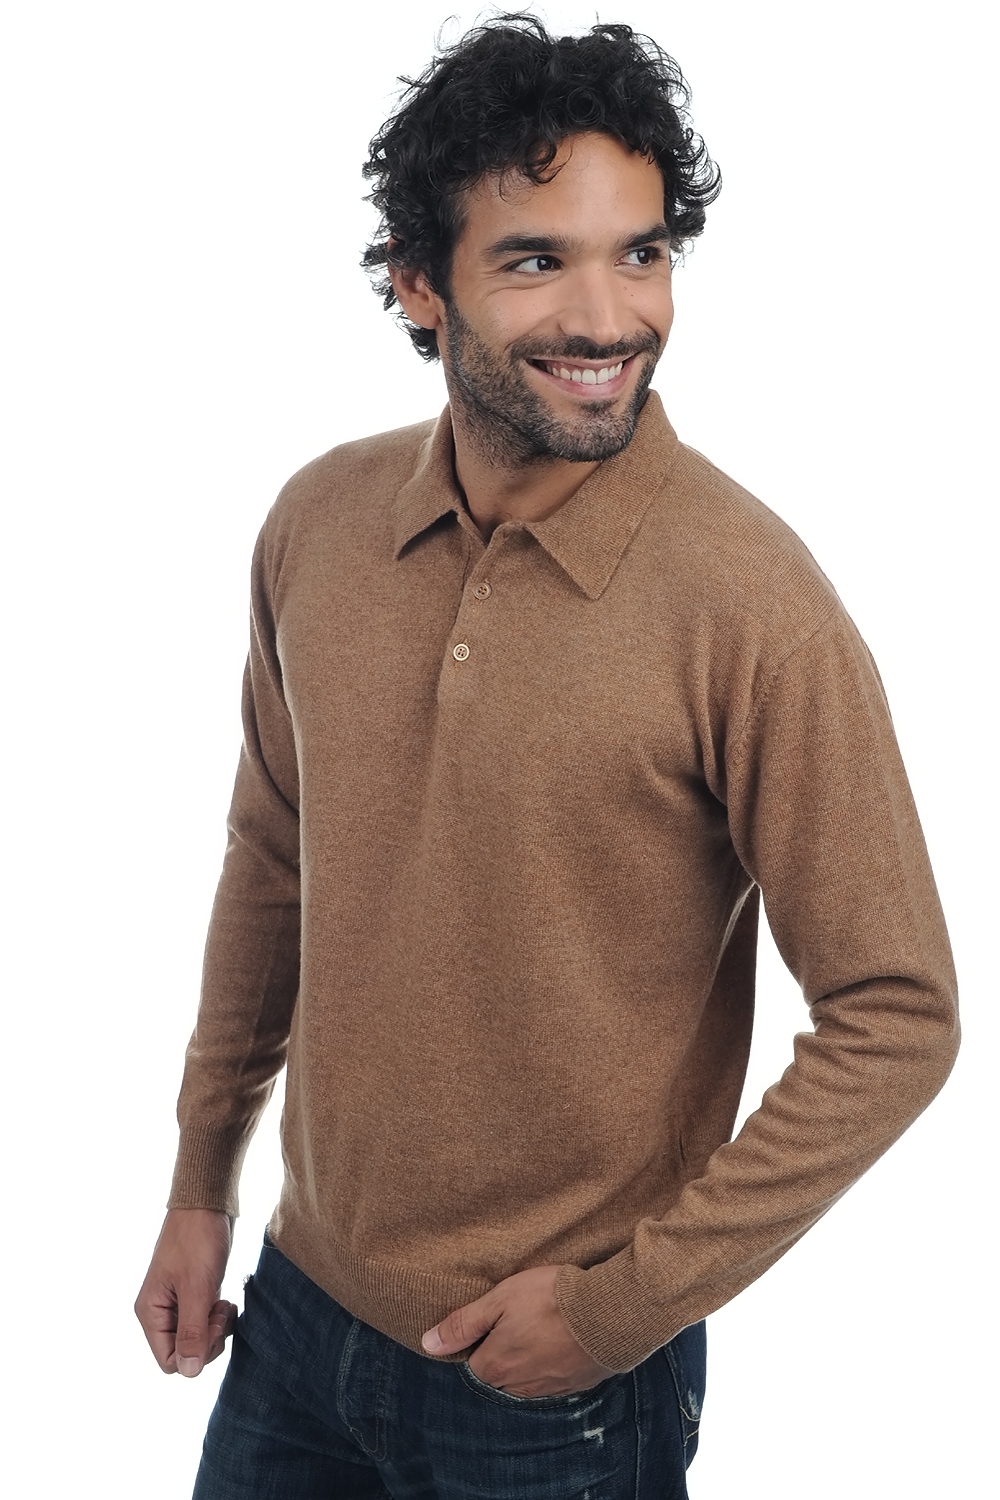 Cashmere men polo style sweaters alexandre camel chine 4xl